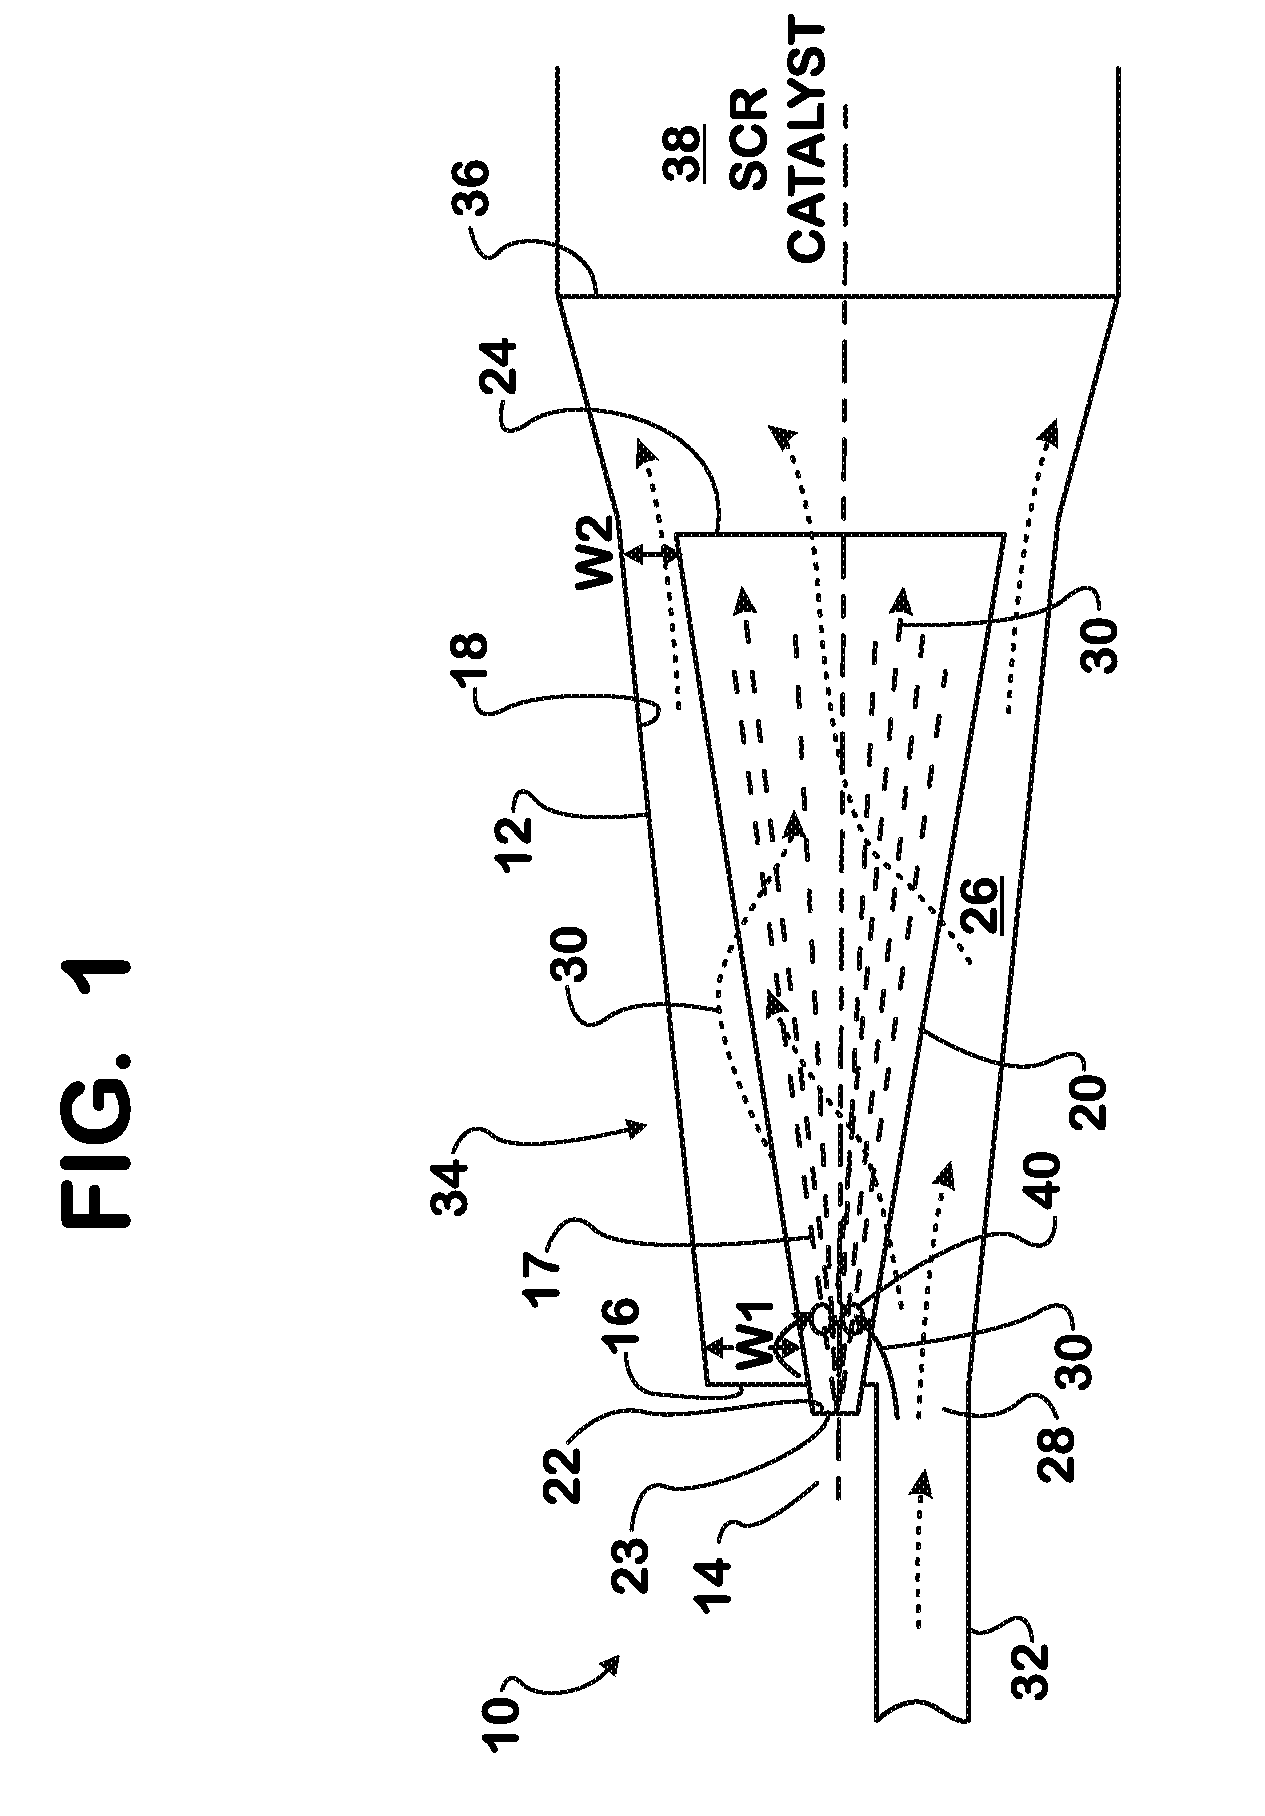 Method, system and apparatus for liquid injection into a gas system